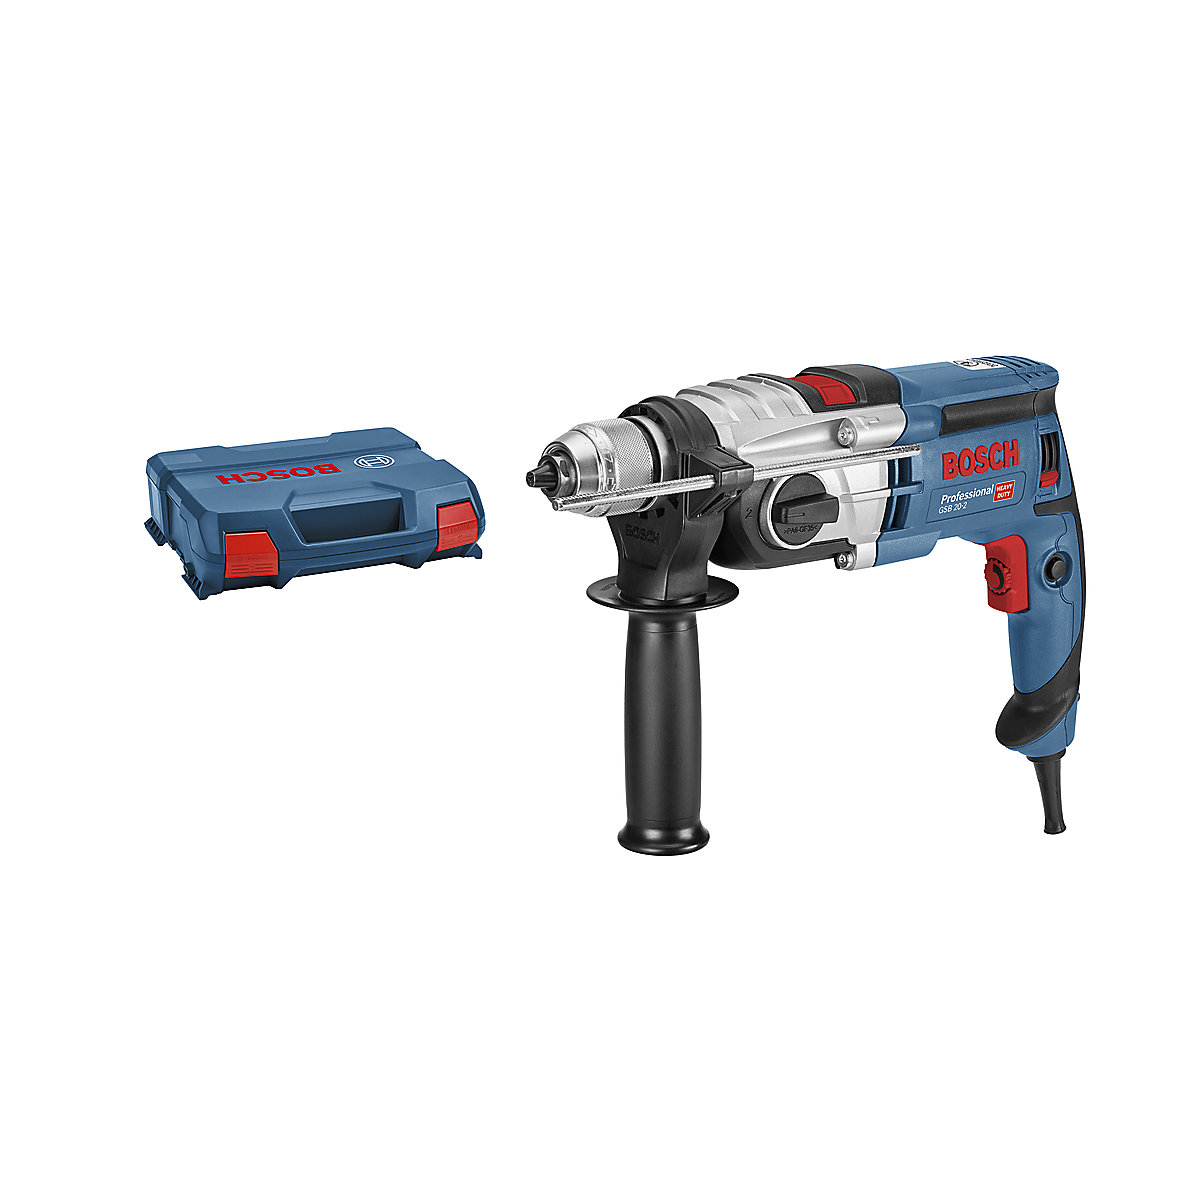 Klopboormachine GSB 20-2 Professional – Bosch (Productafbeelding 4)-3